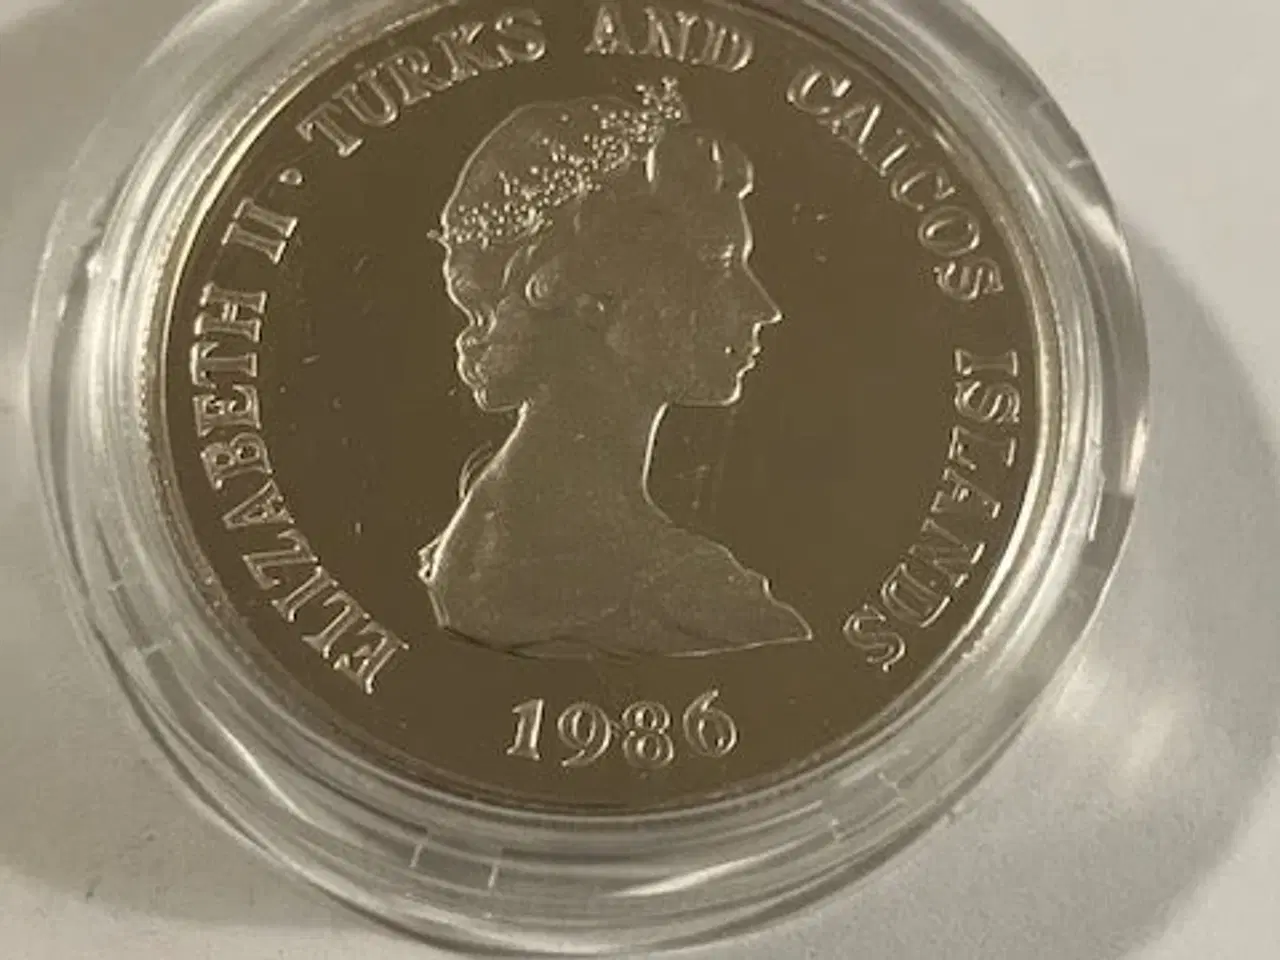 Billede 1 - One Crown 1986 Turks and Caicos Islands